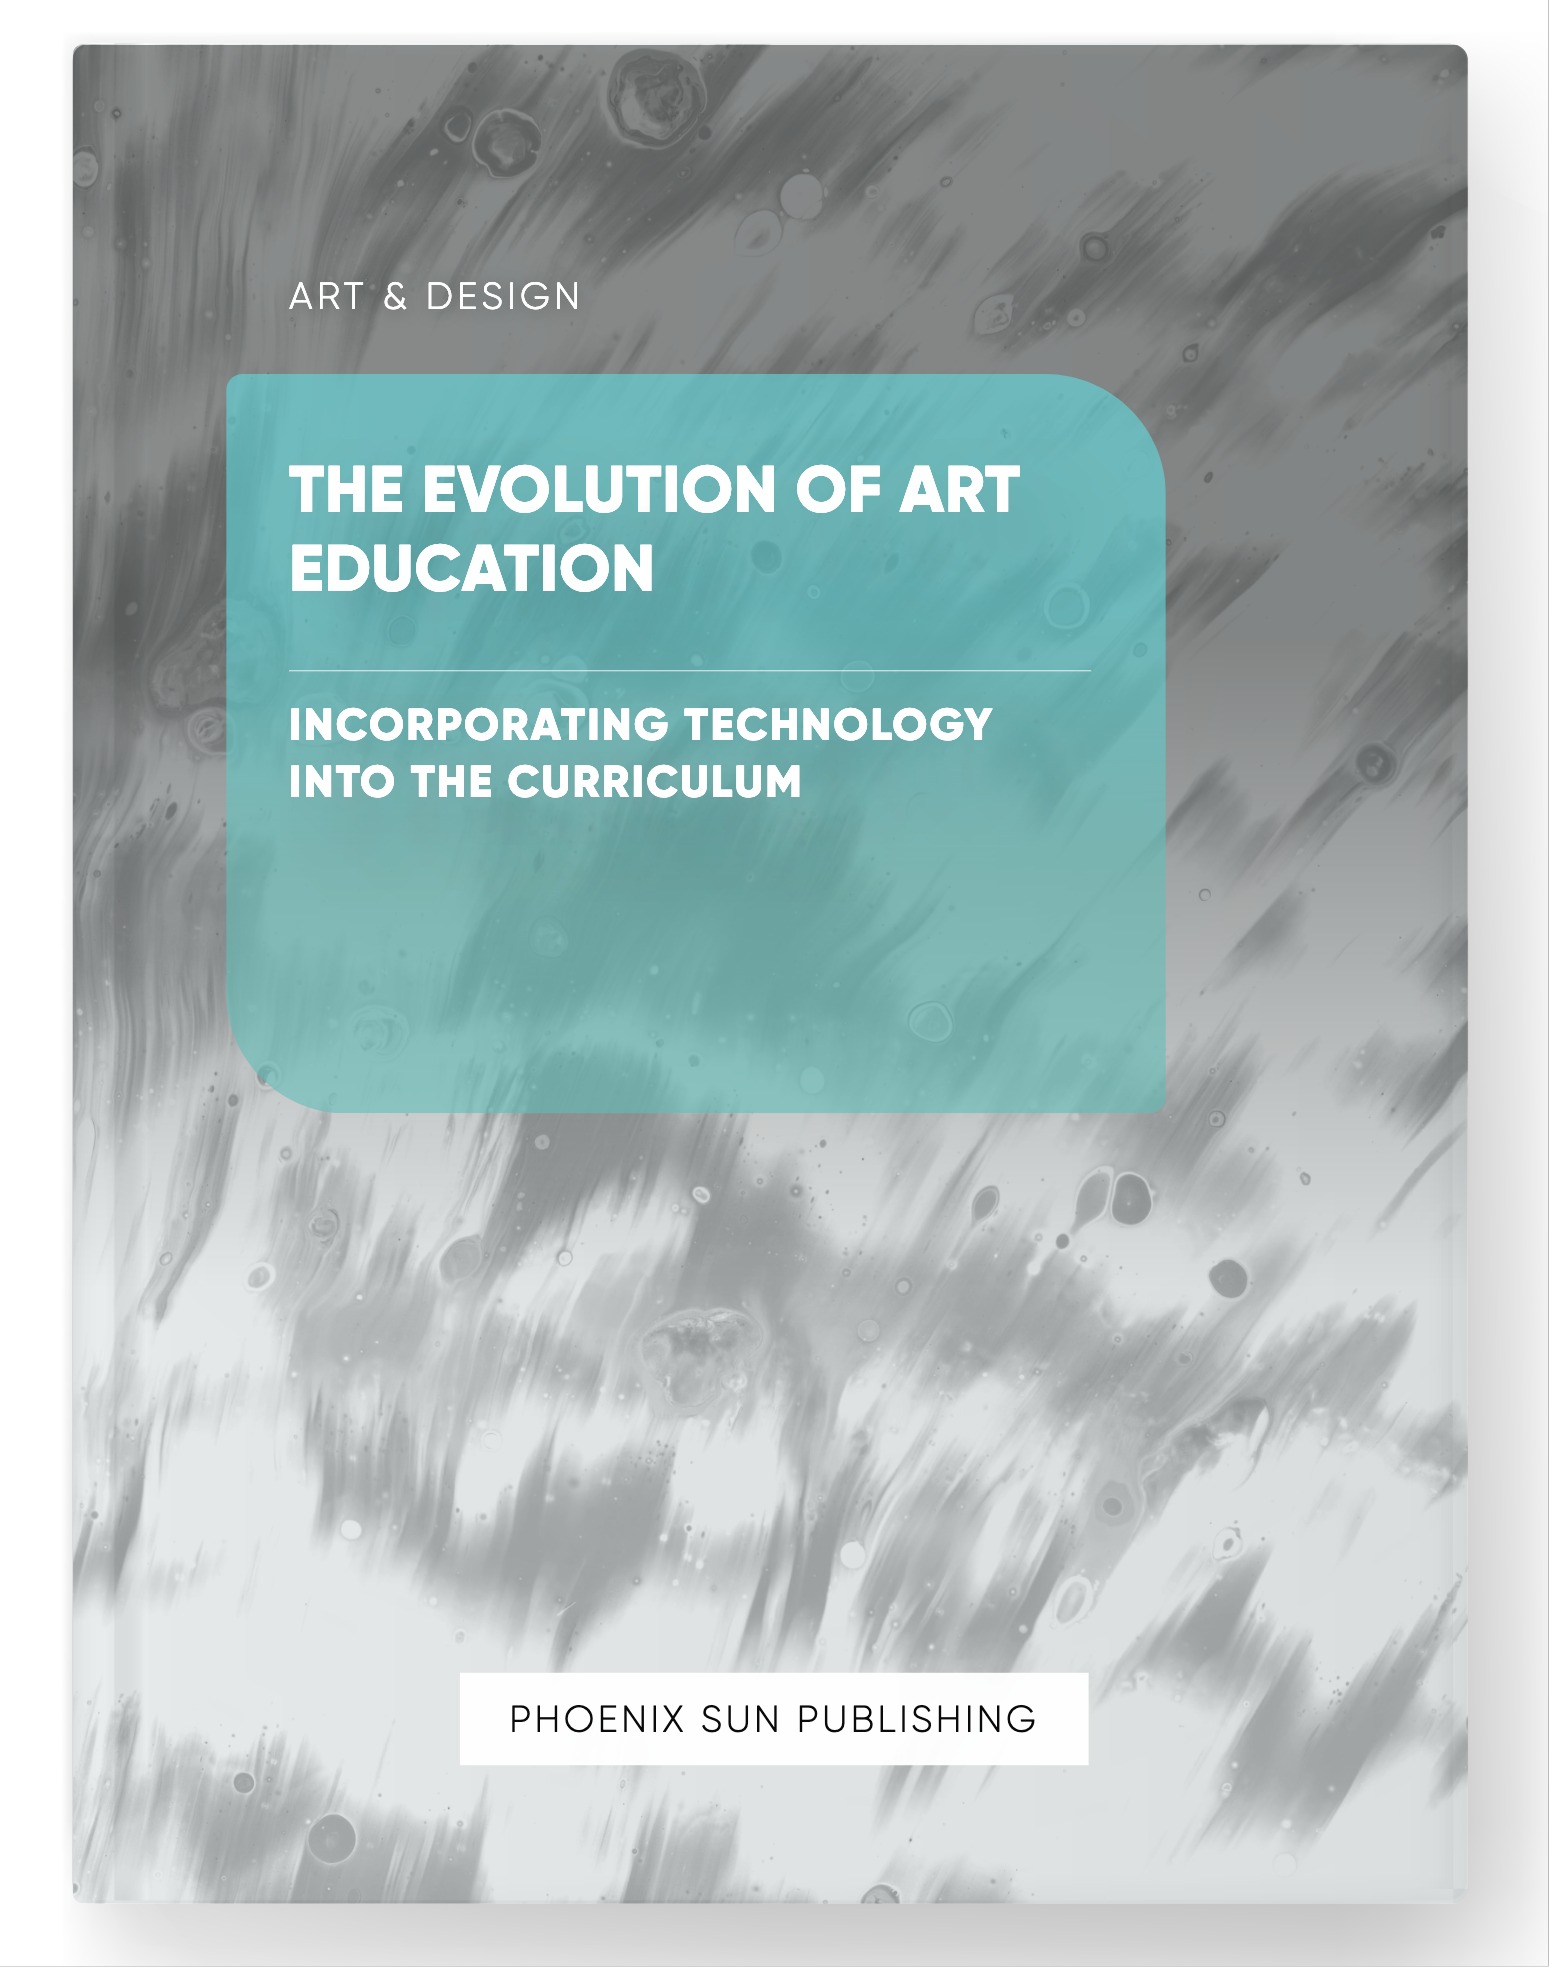 The Evolution of Art Education – Incorporating Technology into the Curriculum